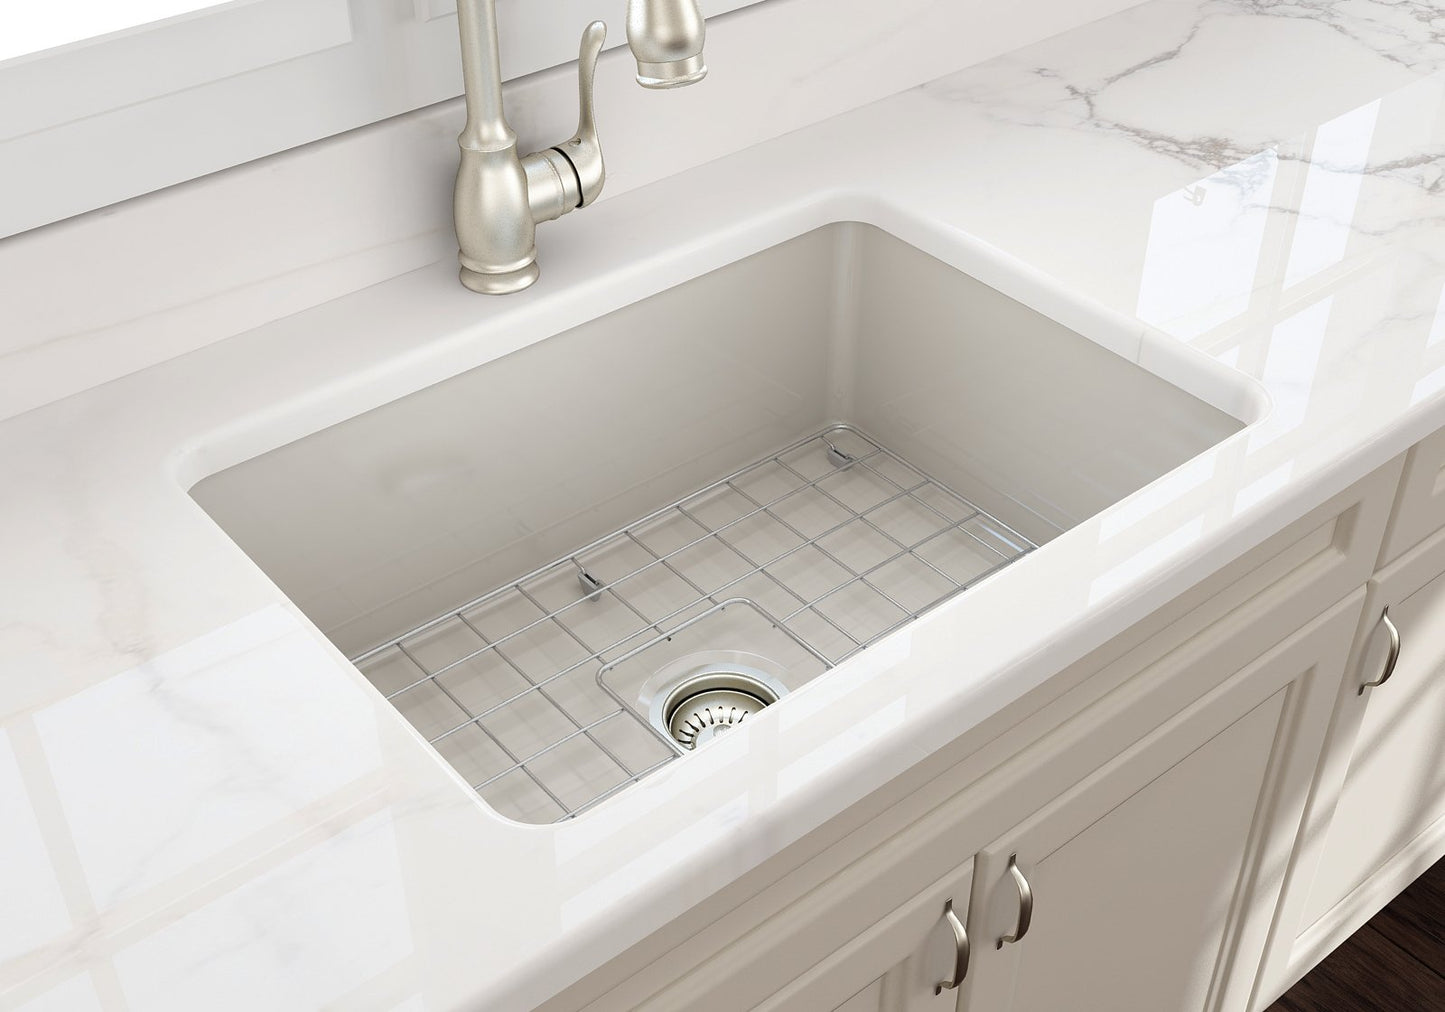 Bocchi Undermount Fireclay 27" Single Bowl Kitchen Sink (Call for special pricing)